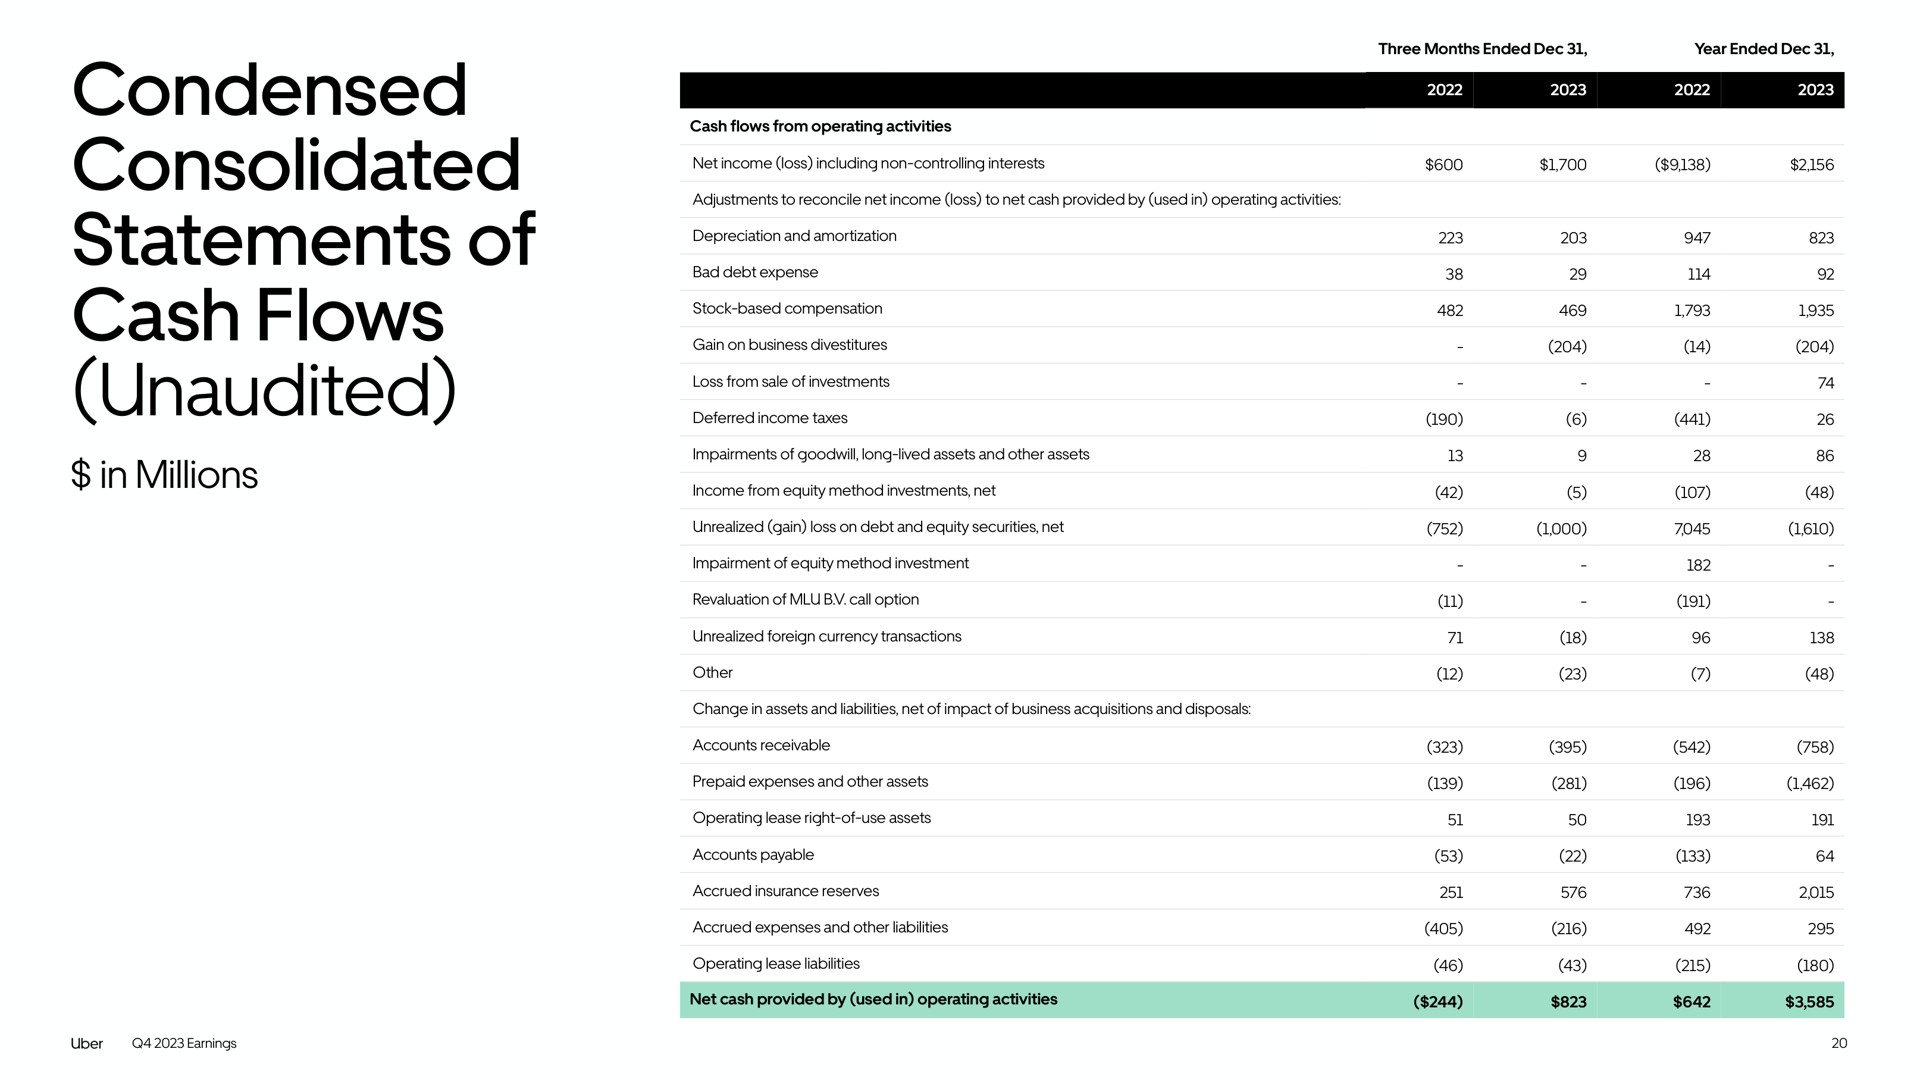 condensed consolidated statements of cash flows unaudited | Uber